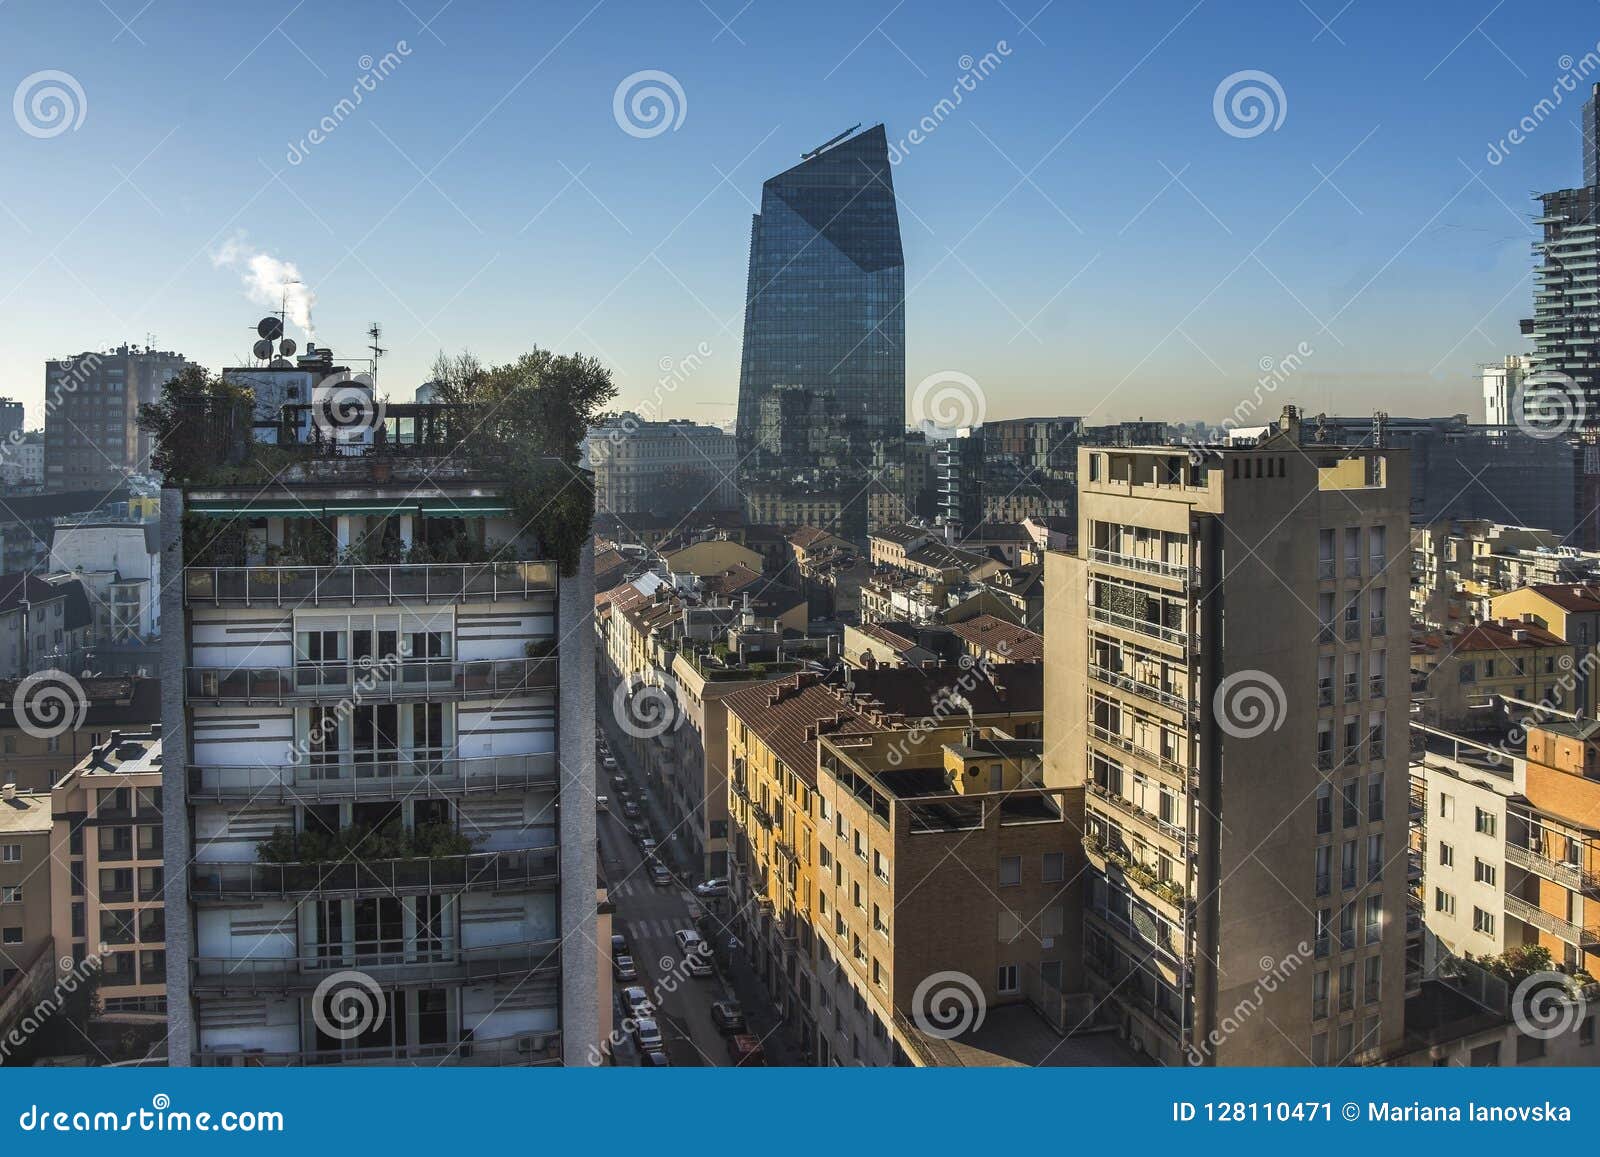 milan skyline with modern skyscrapers in porto nuovo business district, italy